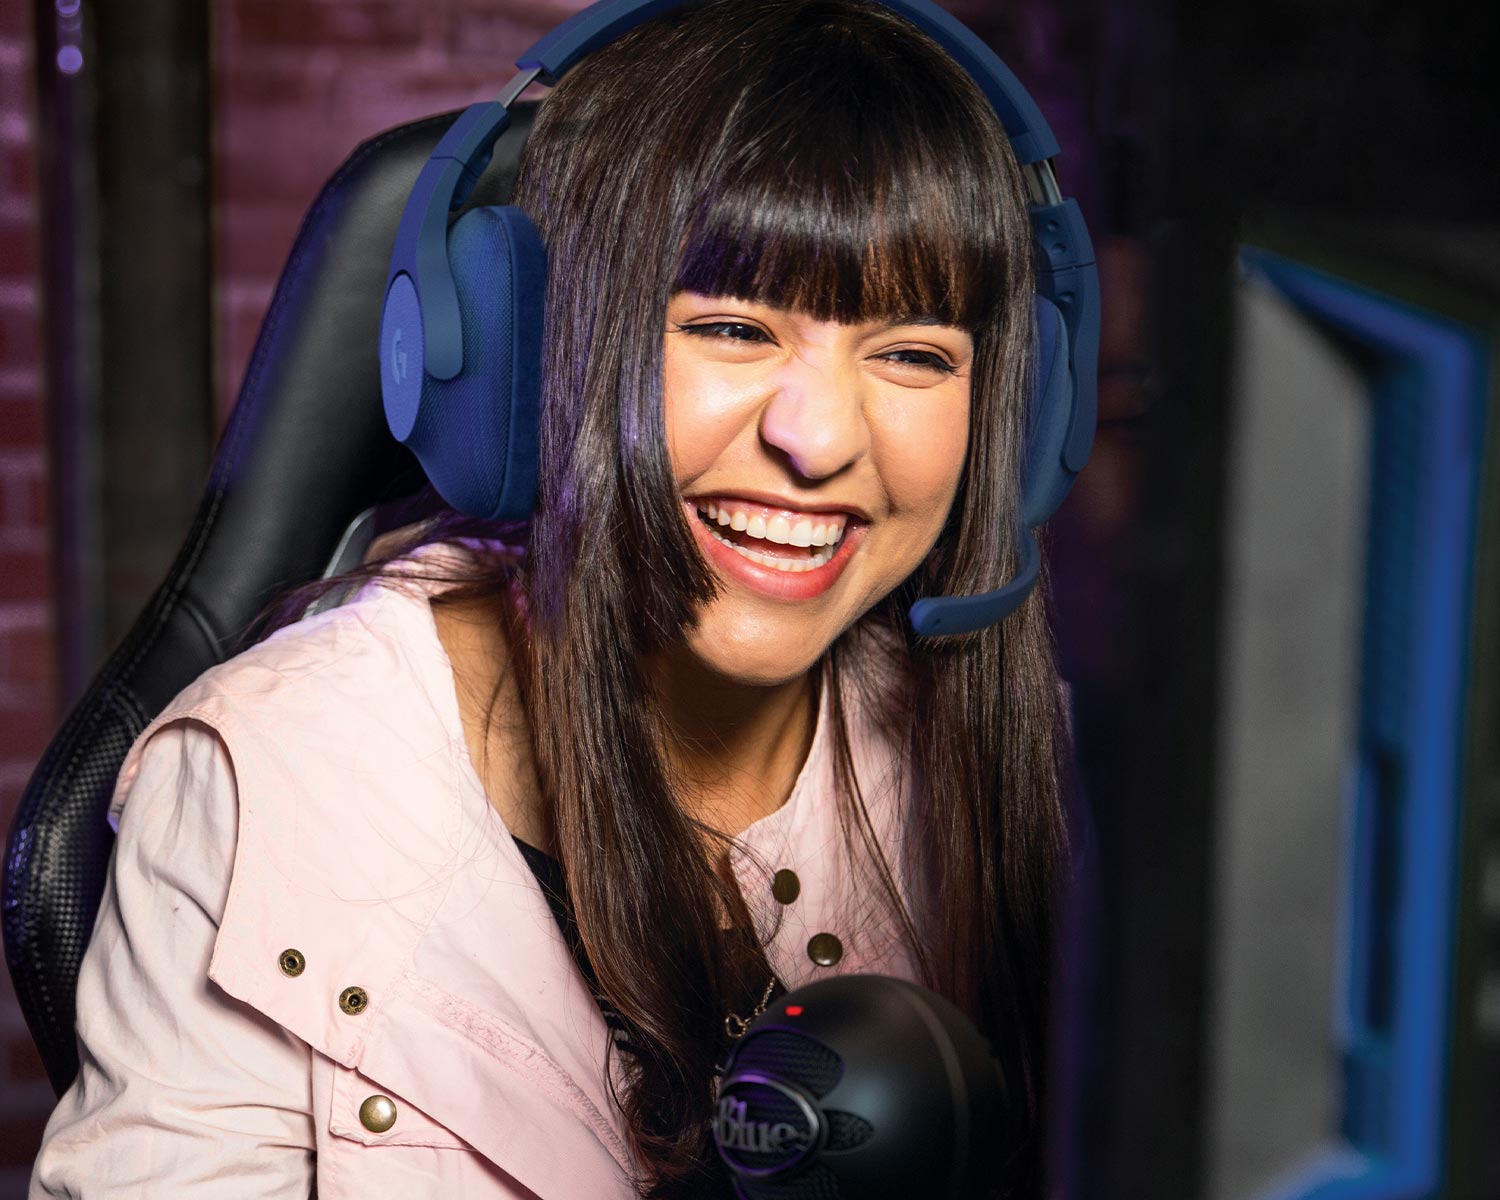 a woman smiles while wearing a microphone headset